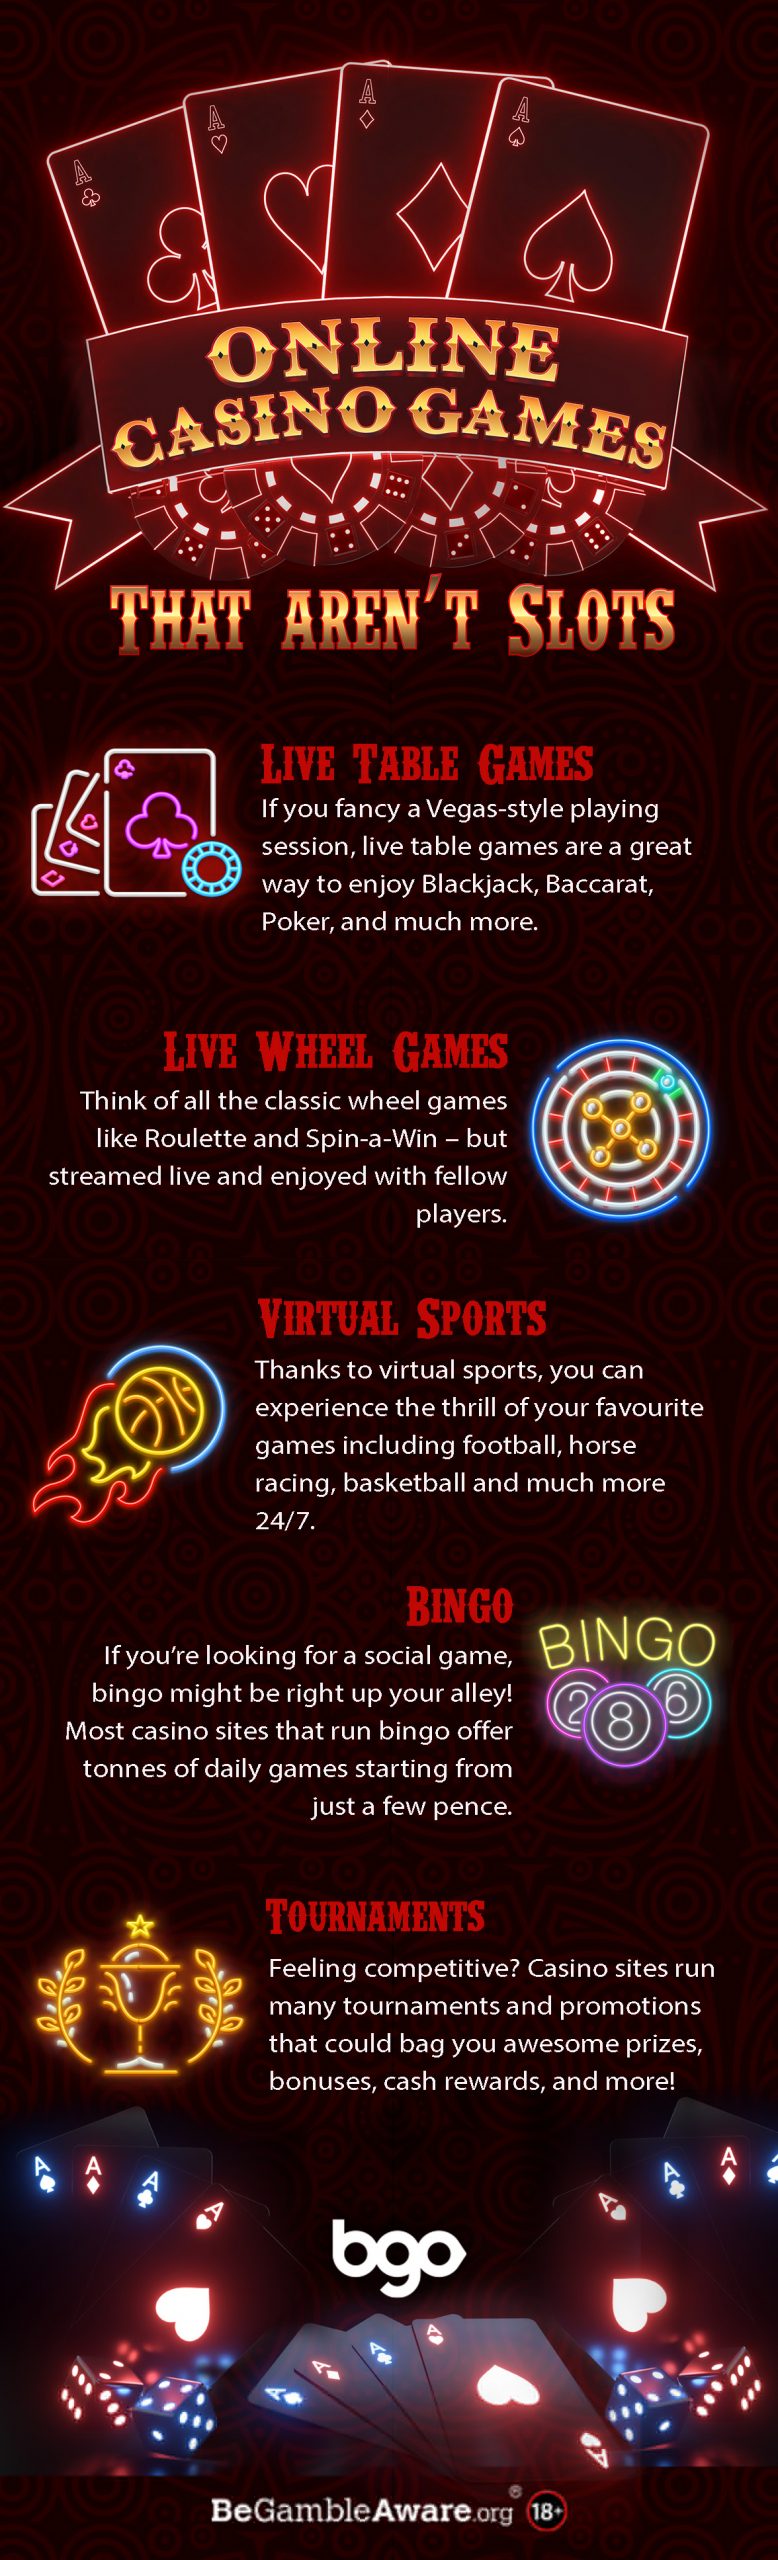 Online Casino Games that arent Slots infographic